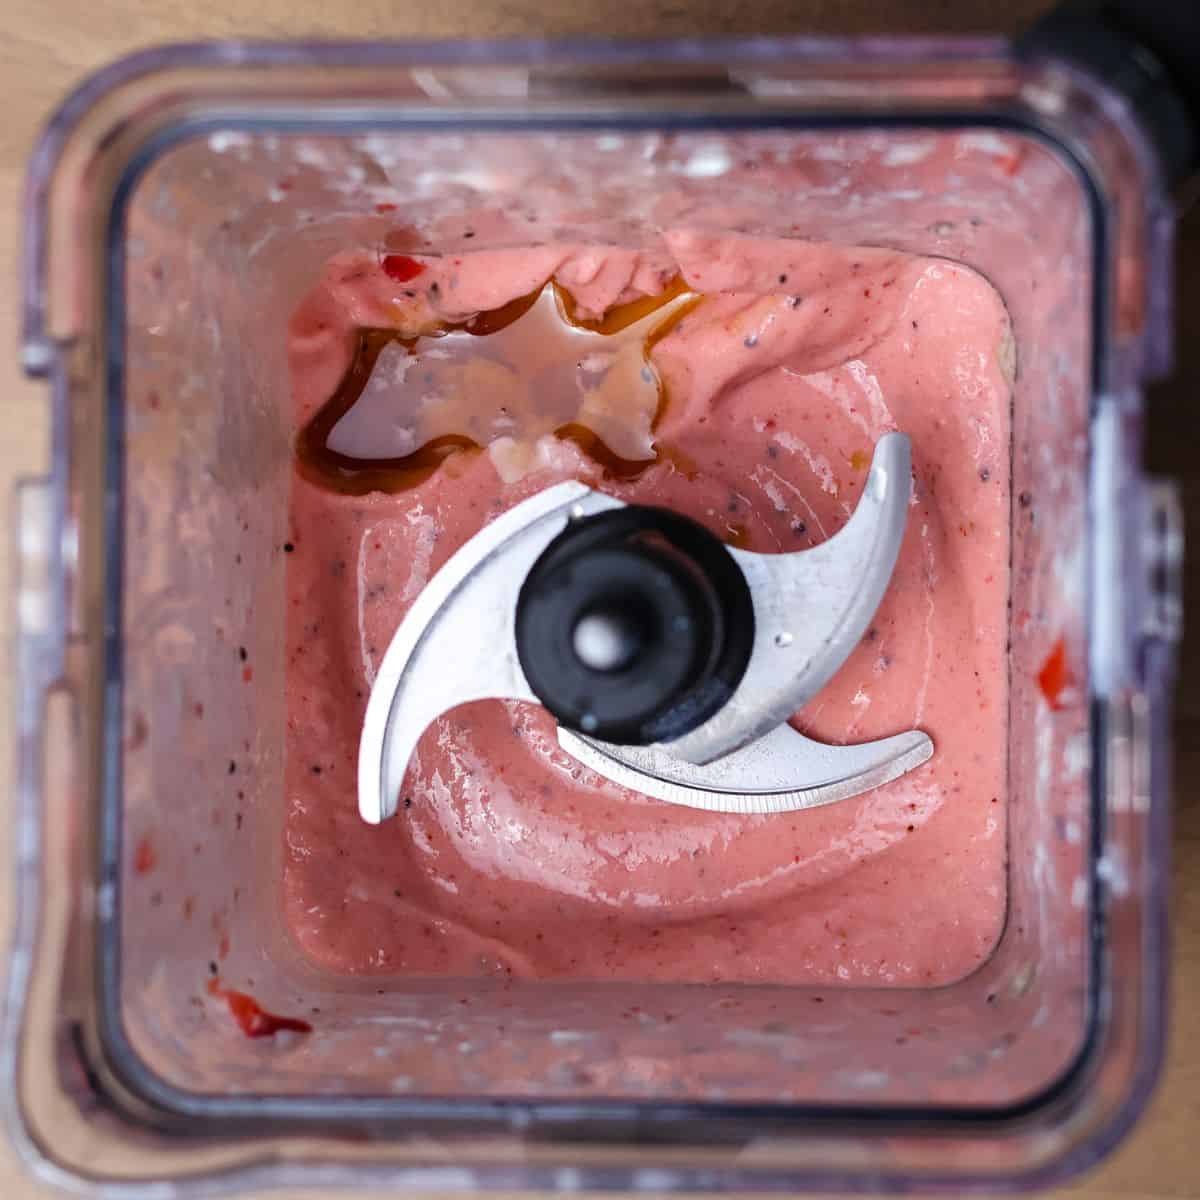 A closer view inside the blender shows the smoothie with a vibrant pink hue, and maple syrup has been drizzled on top, indicating flavor adjustment.